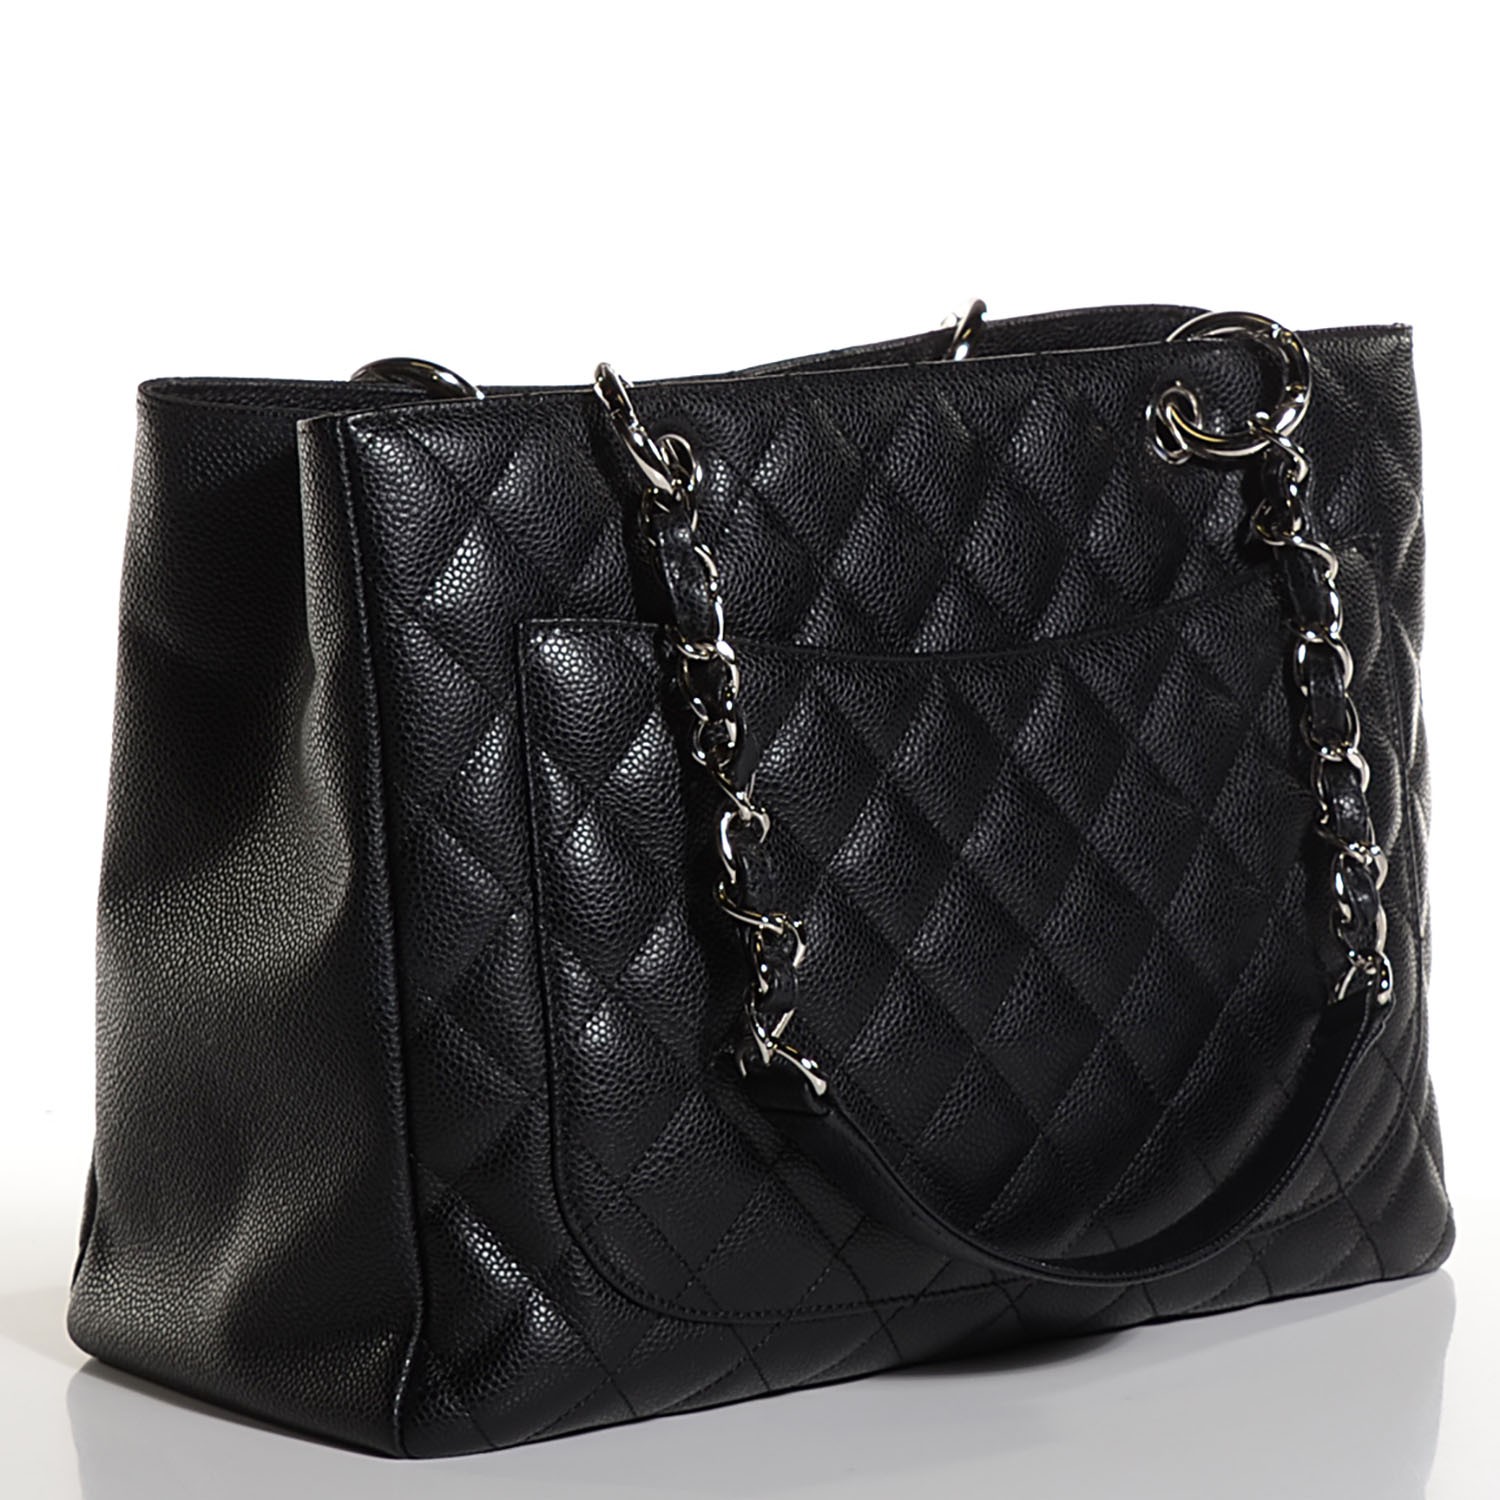 CHANEL Caviar Quilted Grand Shopping Tote GST Black 104501